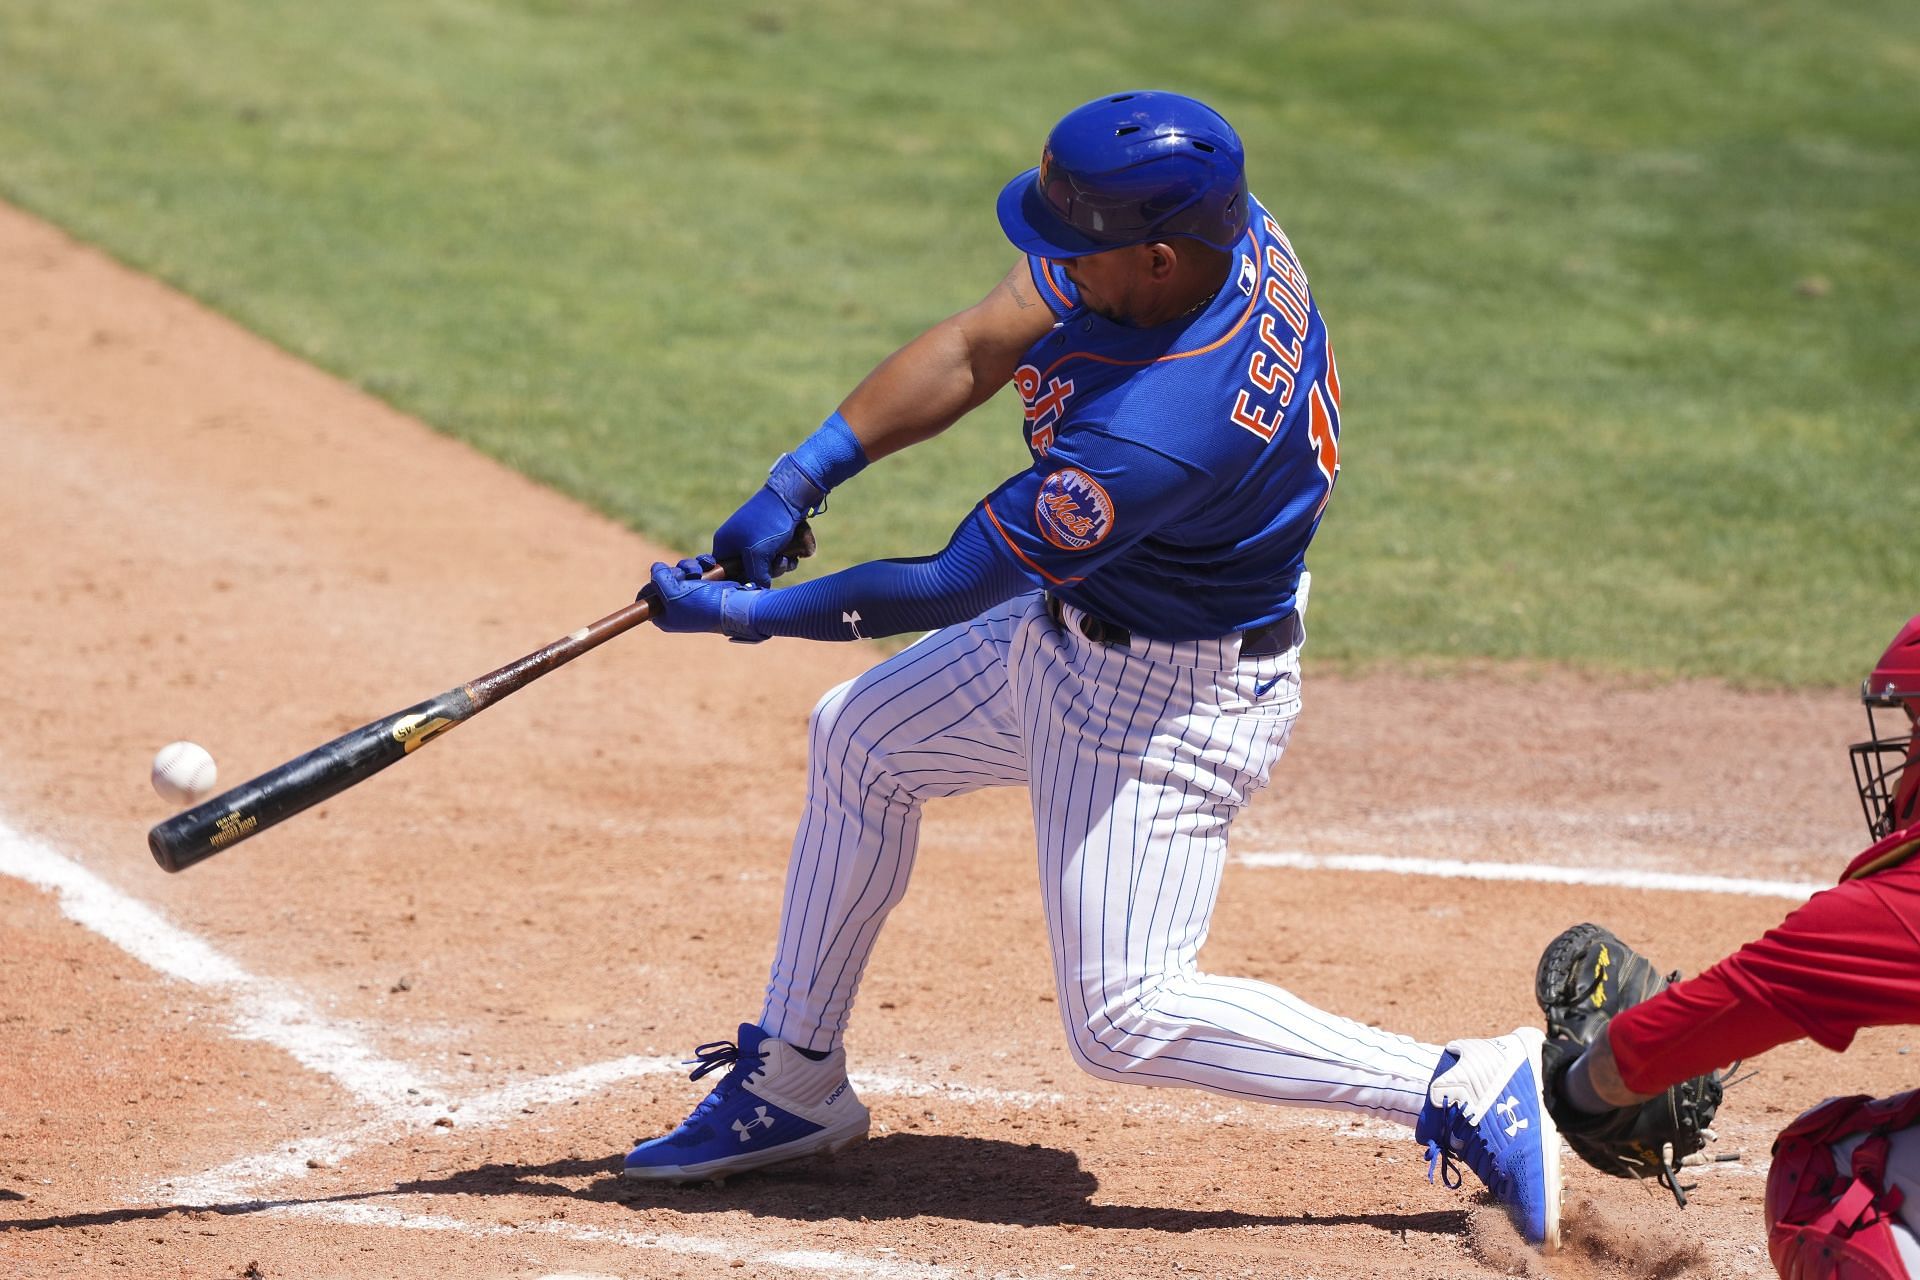 Eduardo Escobar is a key piece for the Mets in 2022